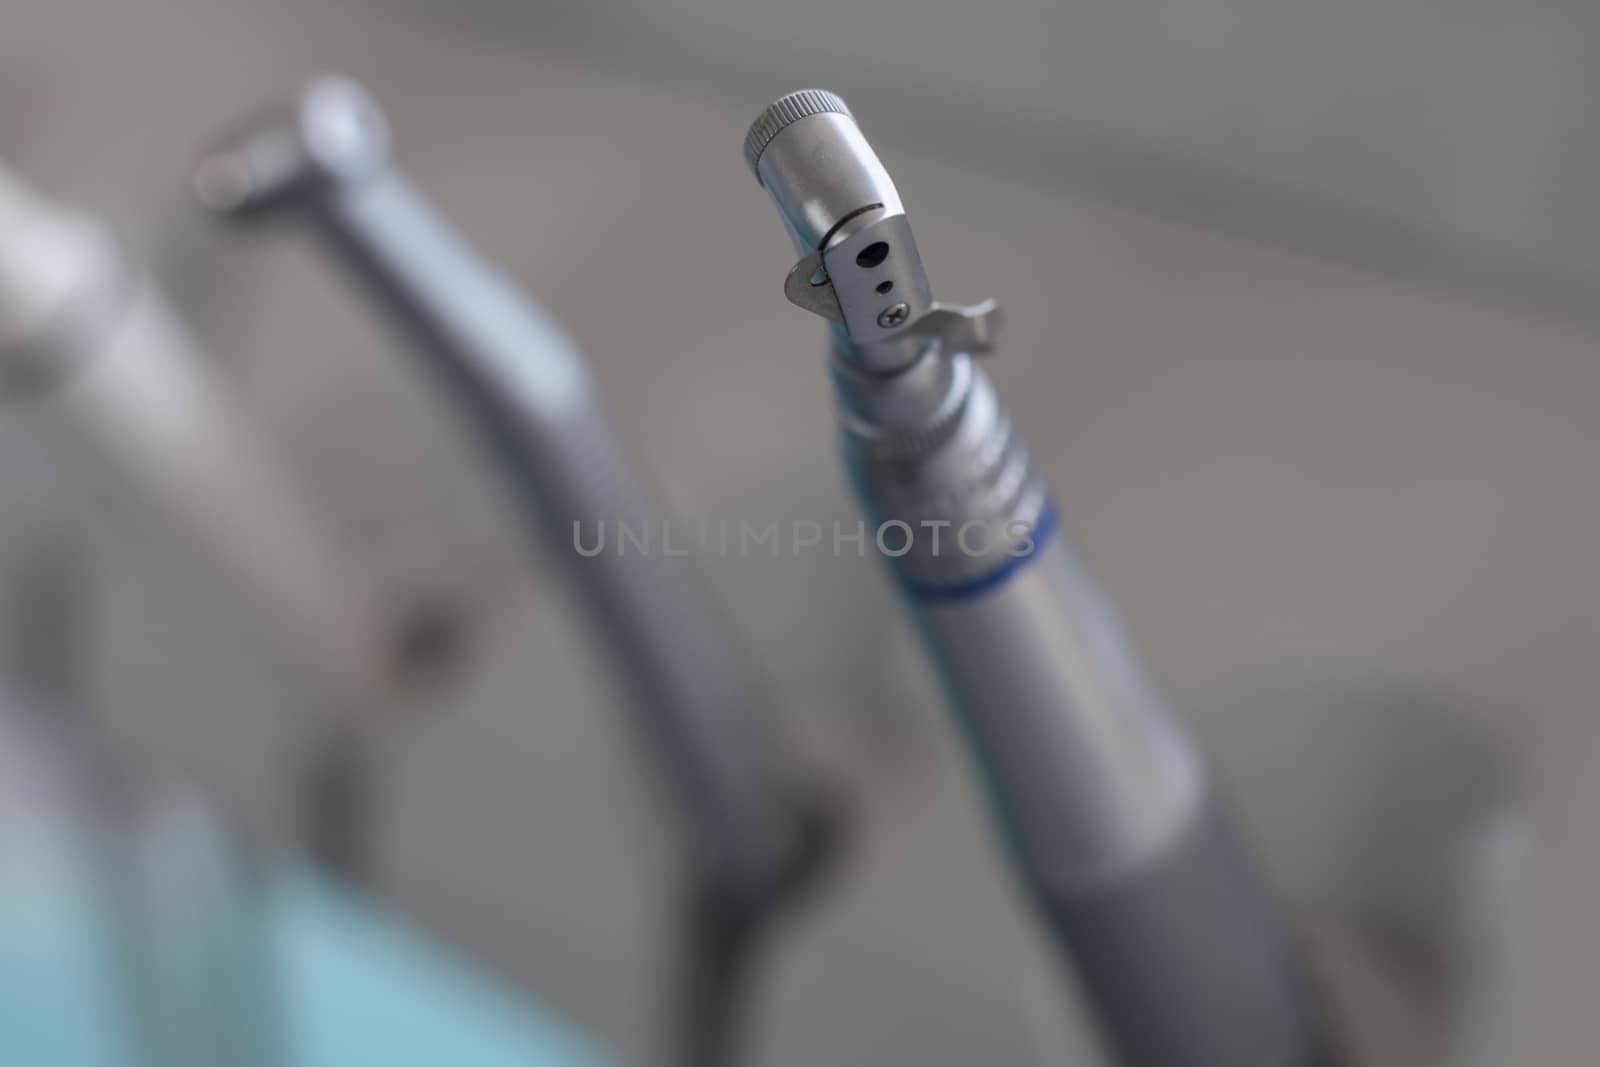 Dentist chair tools closeup on the hand piece drill